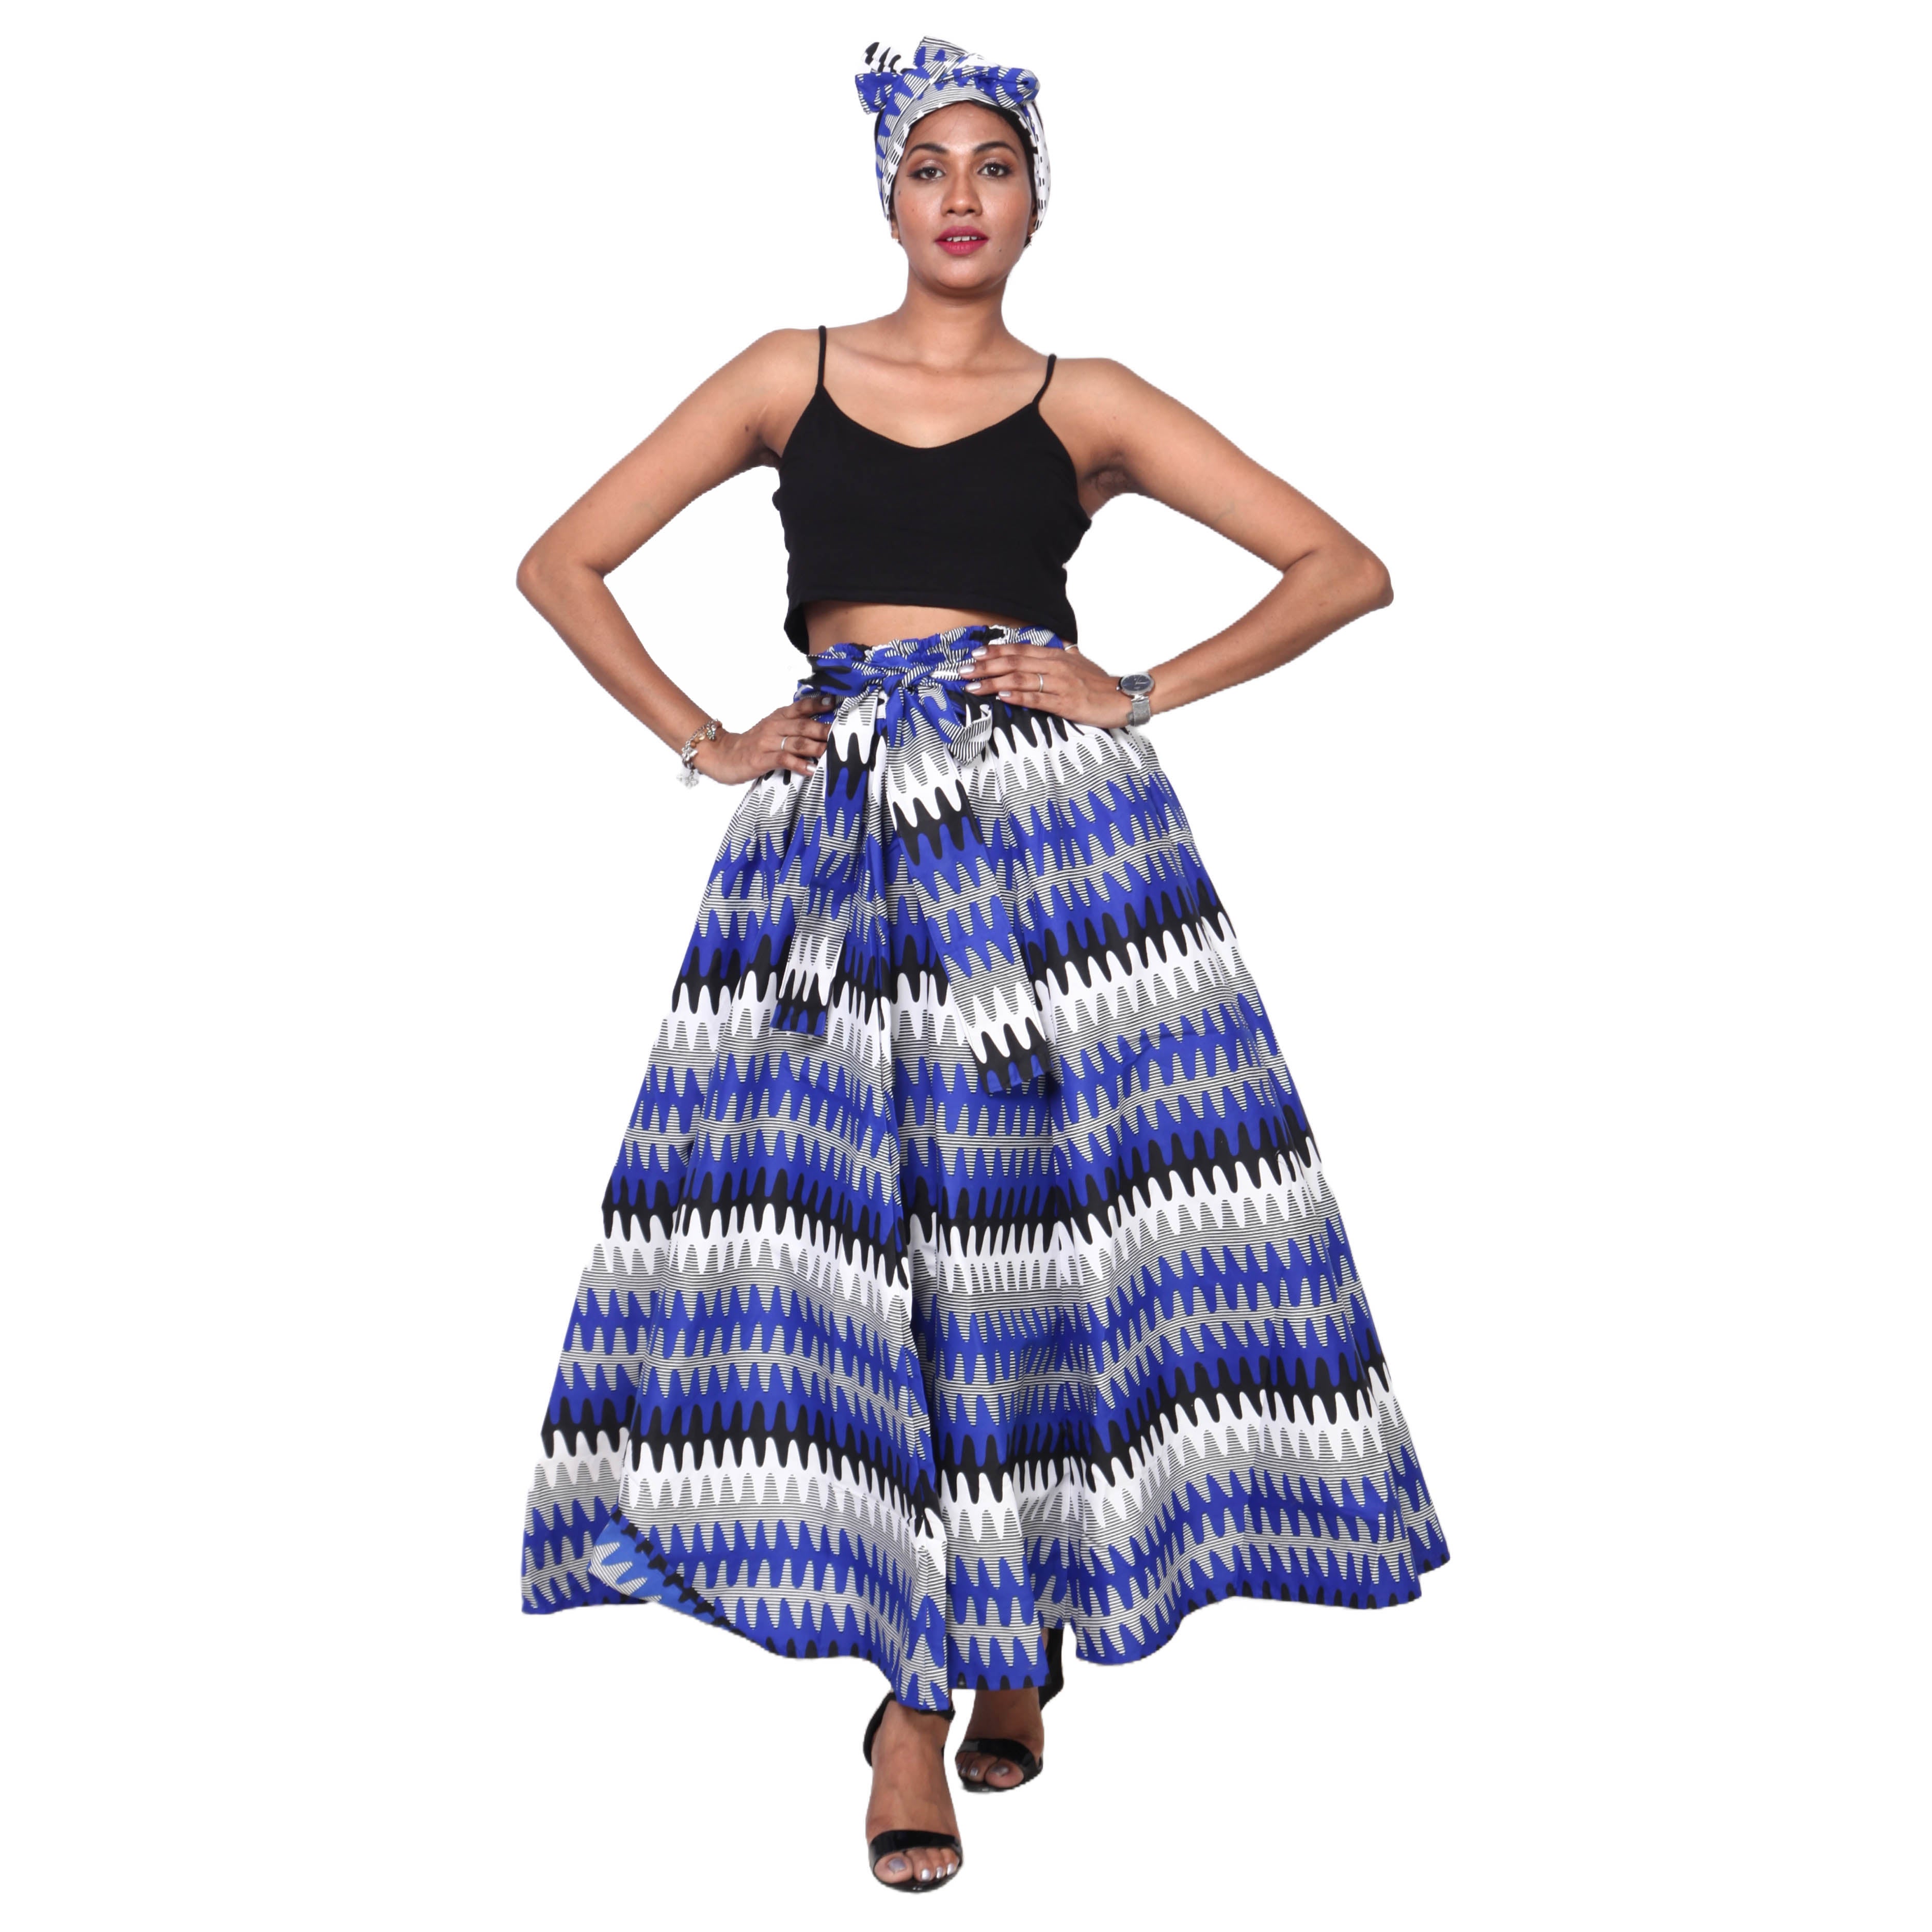 Women's Poly-Cotton Maxi Skirt with Tie Waist black and blue frock